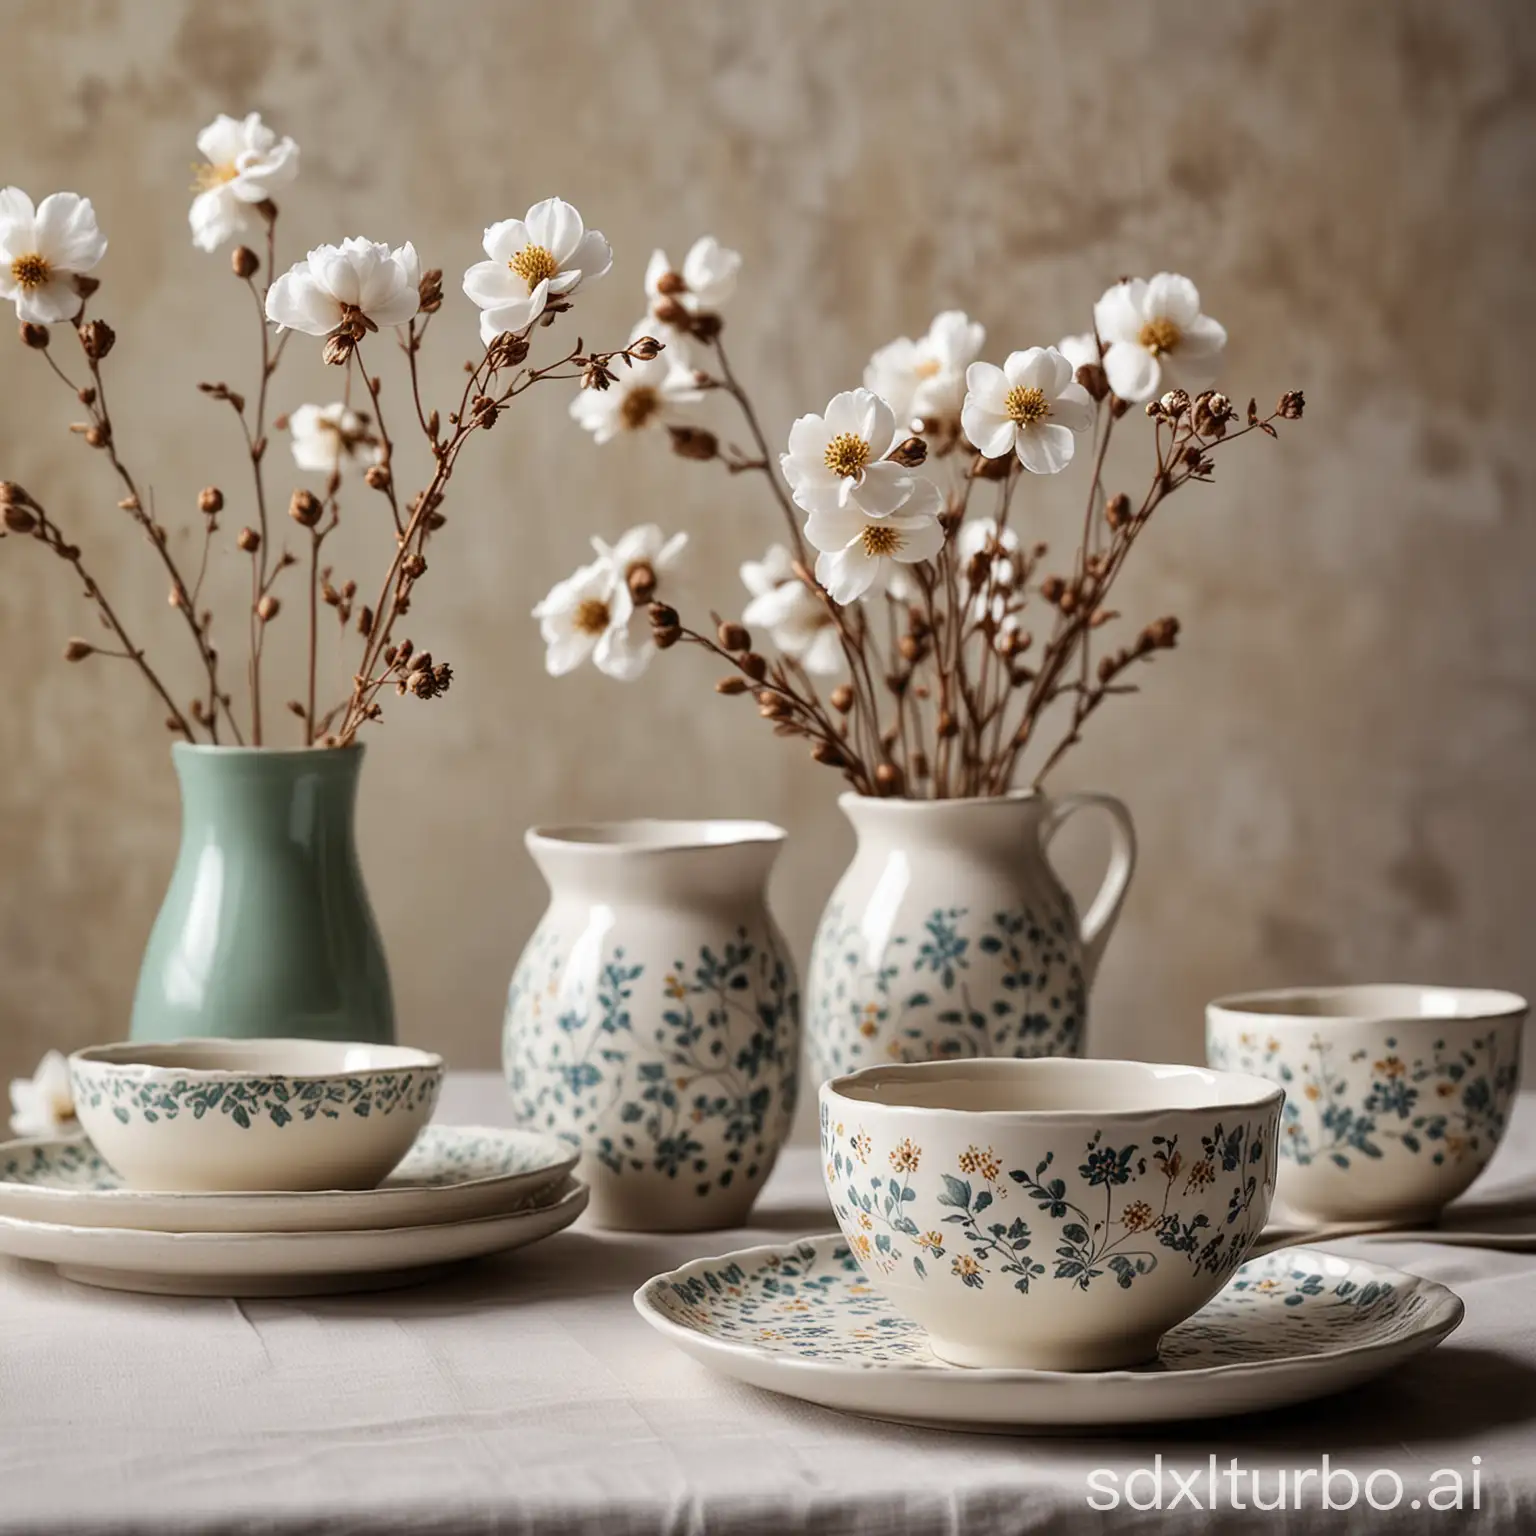 A set of ceramic tableware with cotton flower patterns, with a blurred background and a vase on the left side.